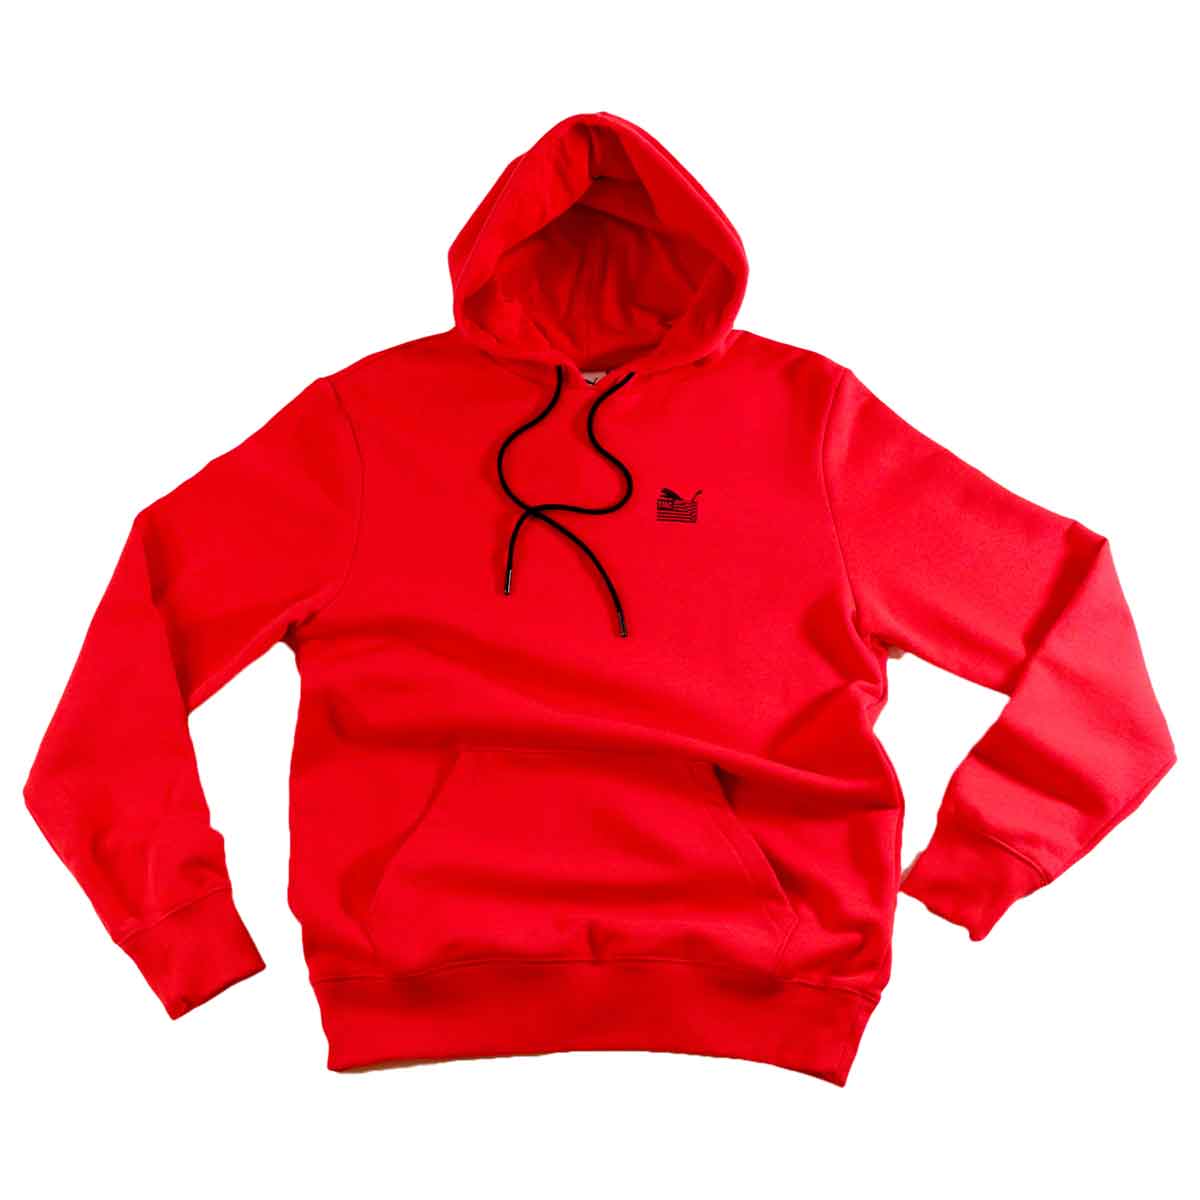 PUMA x TMC Everyday Hussle Collection Hoodie - Red